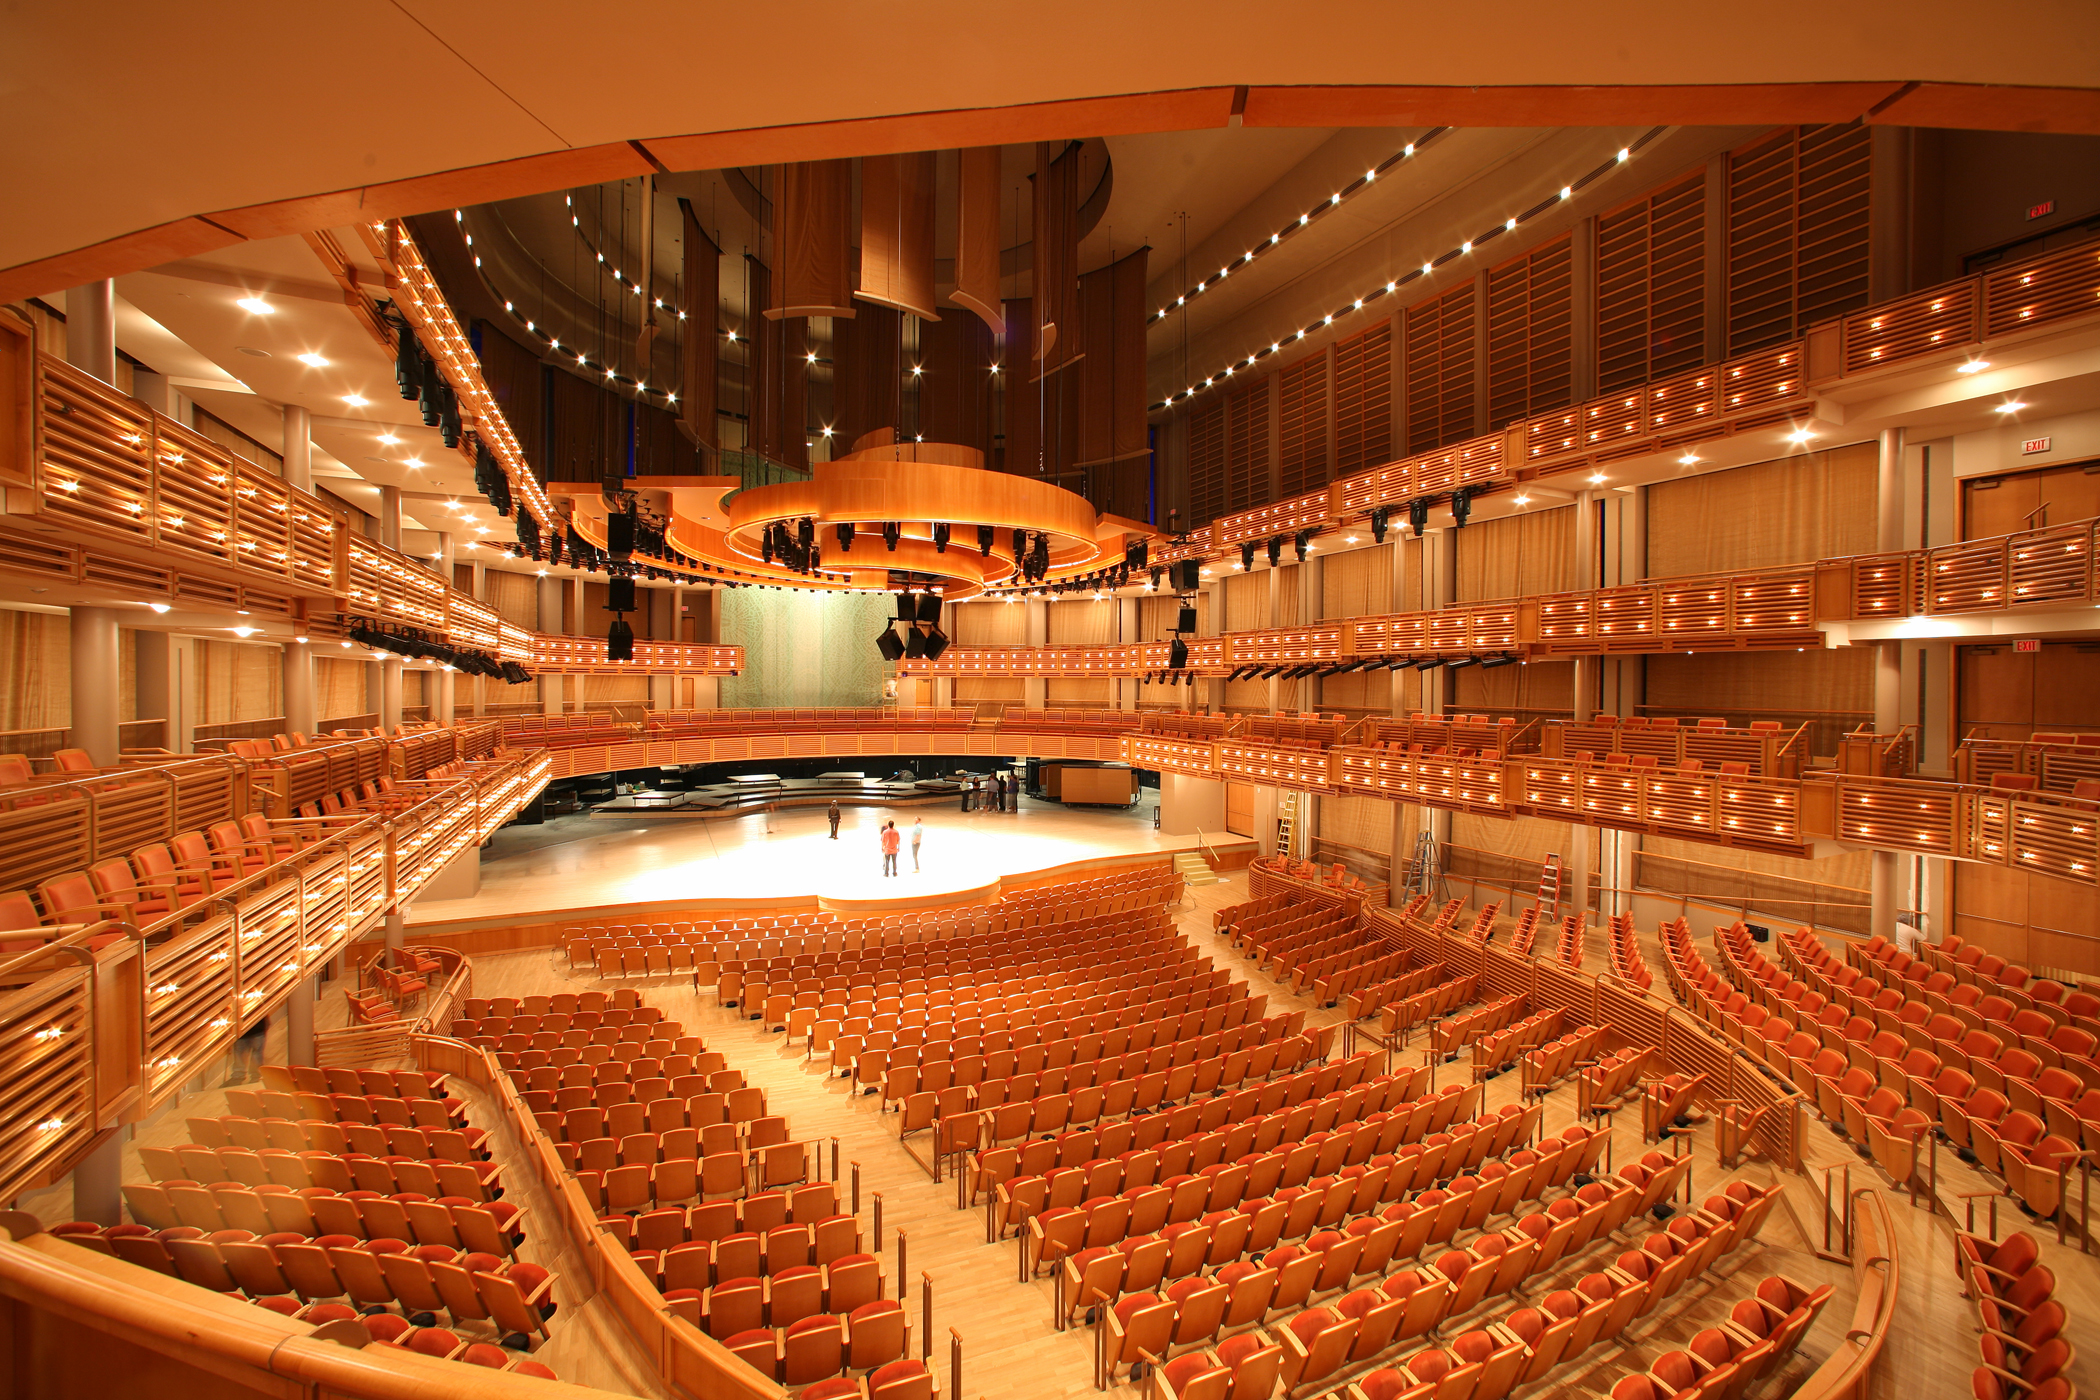 The interior of the John S. and James L. Knight Concert Hall. (Photo courtesy of Robin Hill).